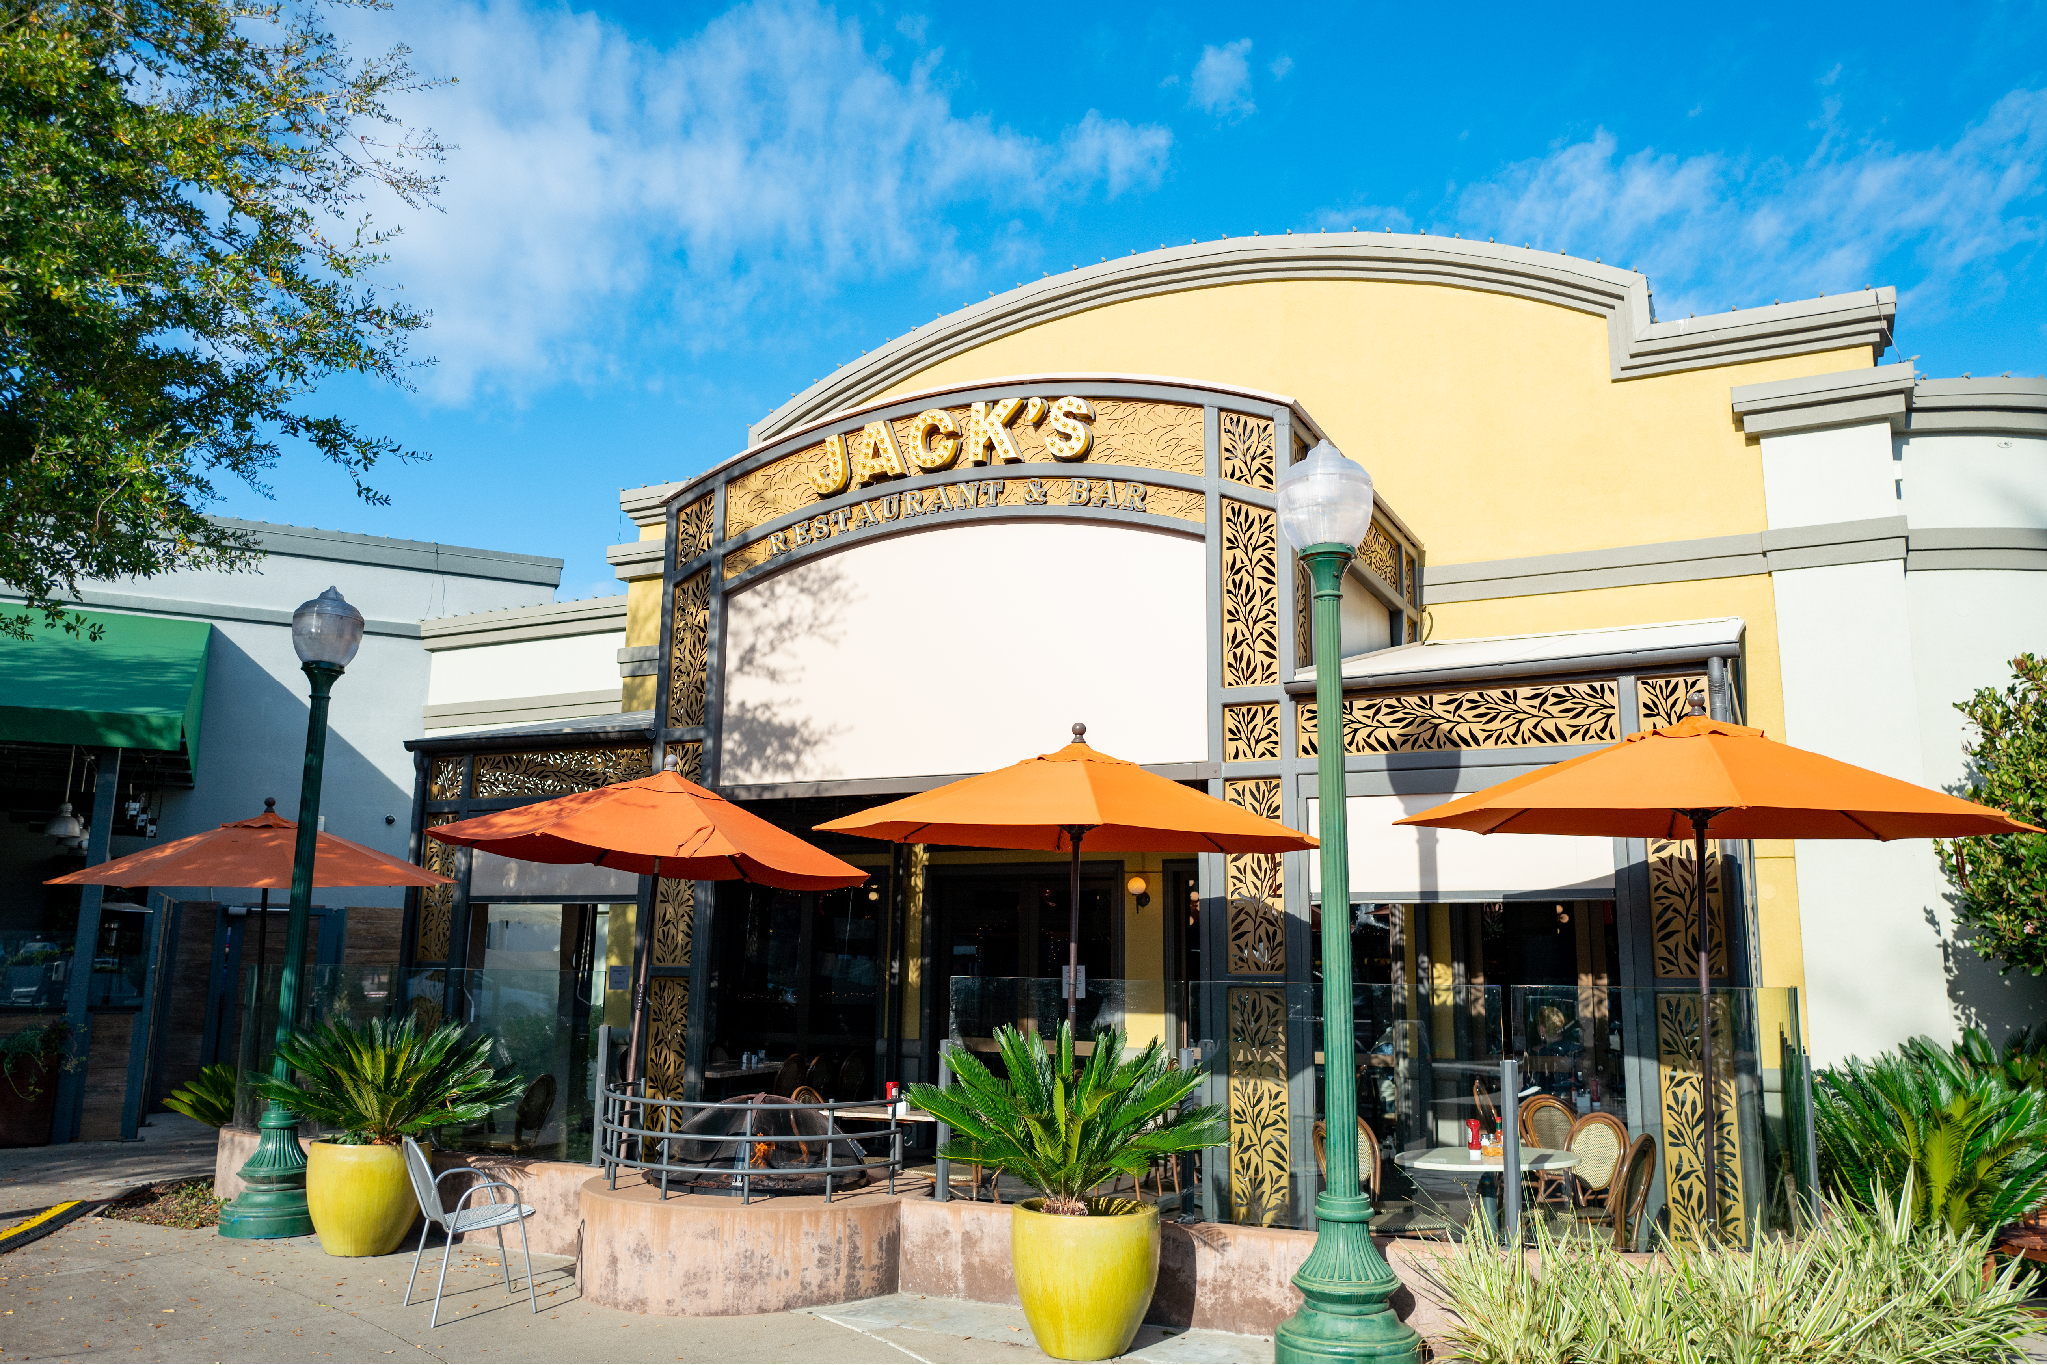 The facade of Jack's restaurant in Pleasant Hill